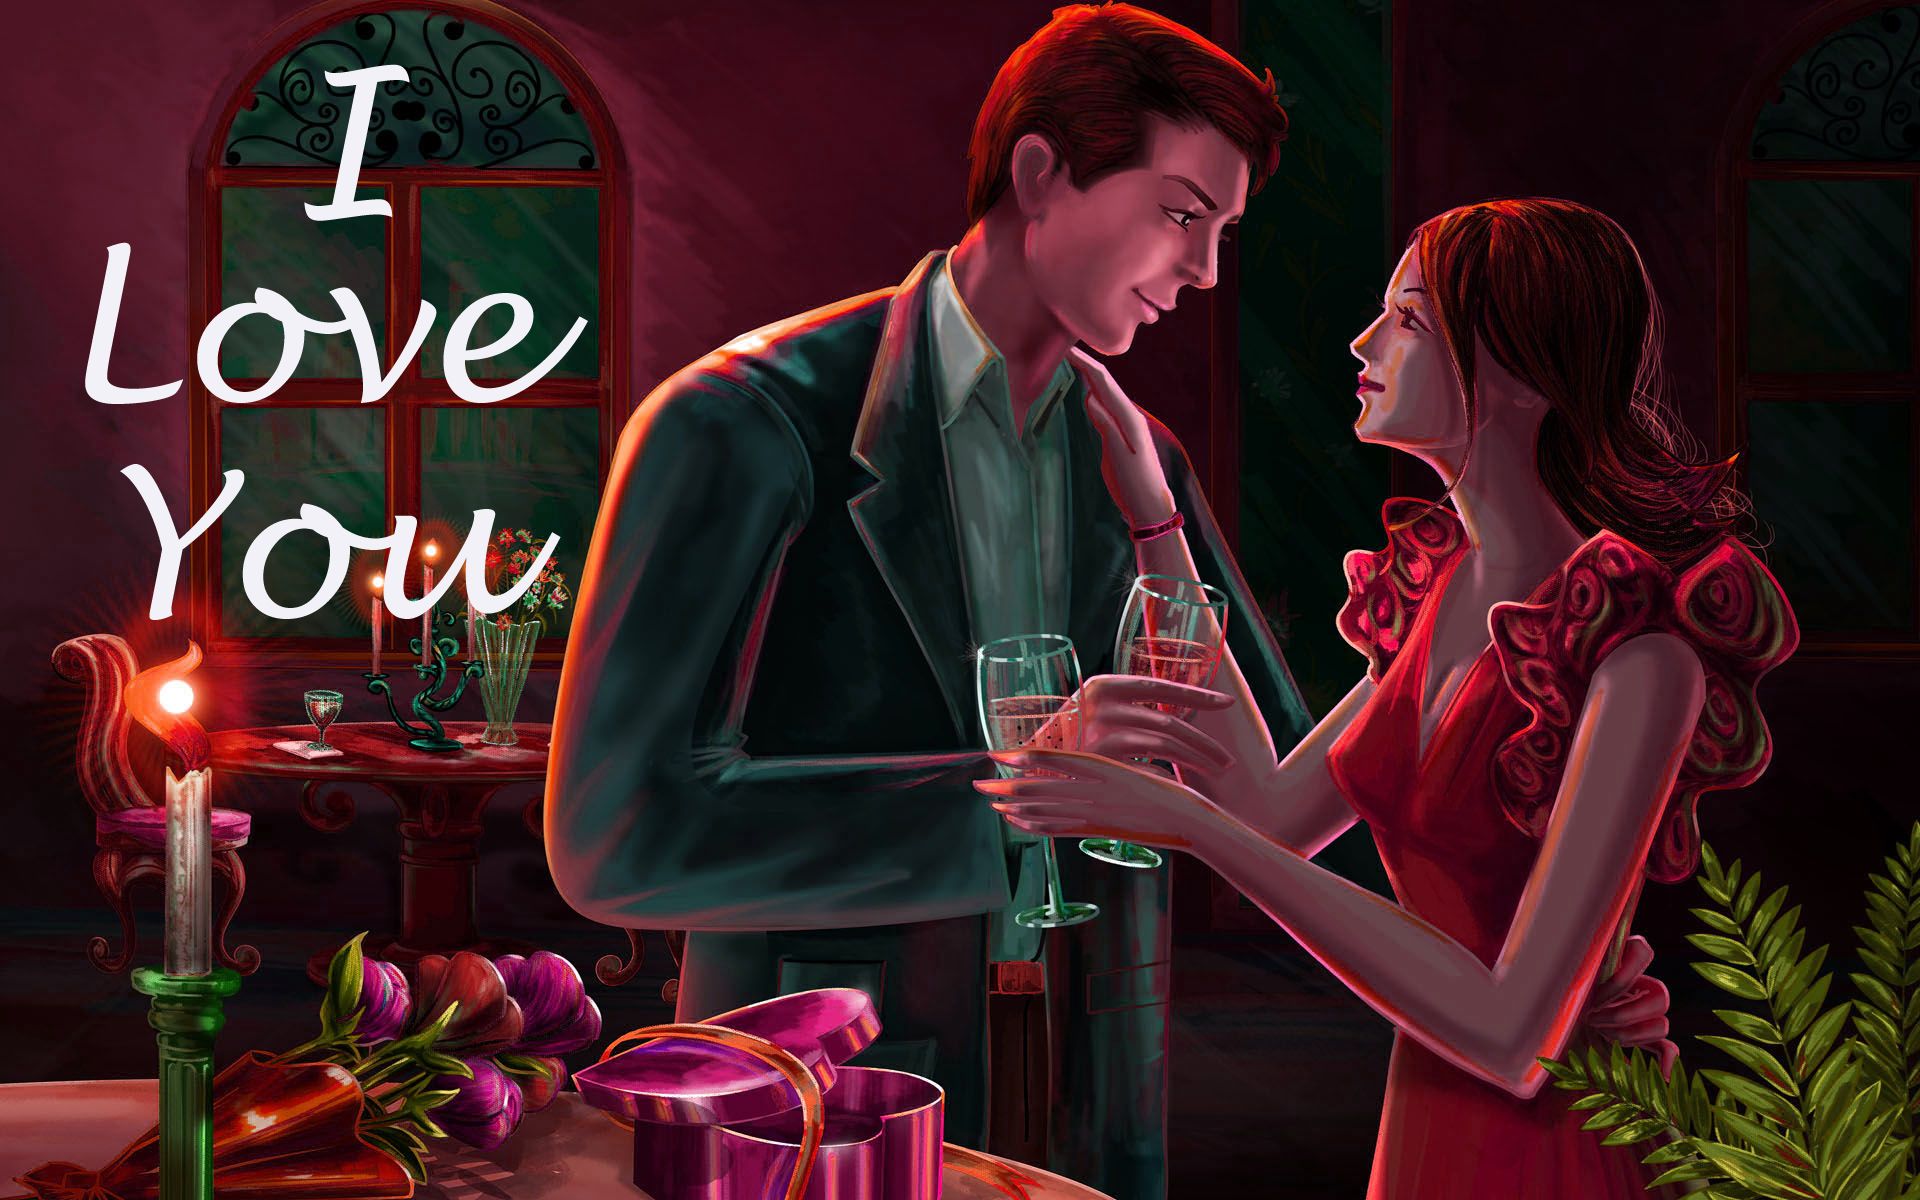 I Love You romantic i love you wallpapers free download 2014